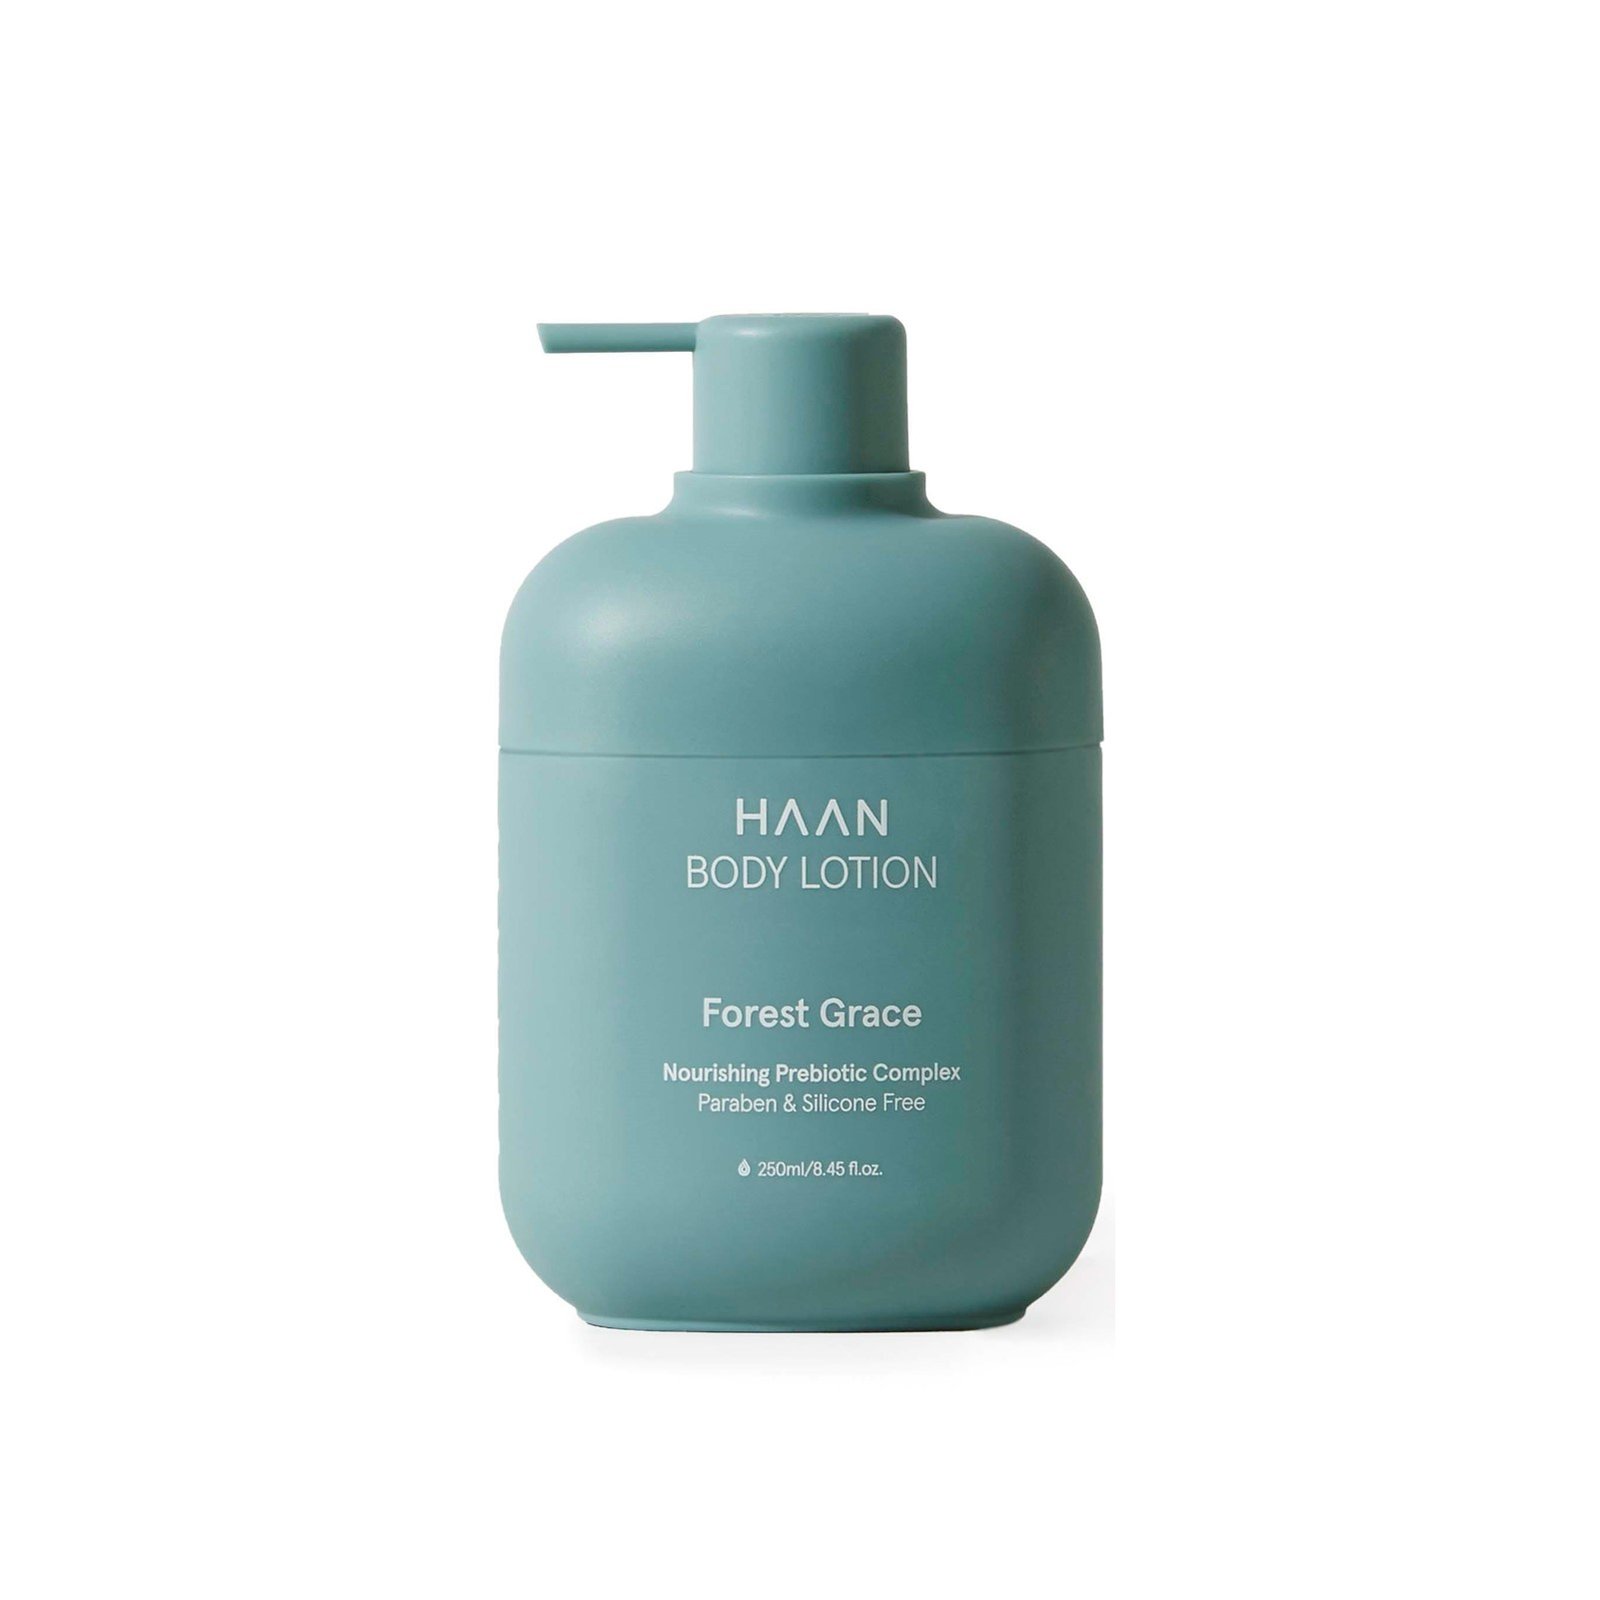 https://static.beautytocare.com/cdn-cgi/image/width=1600,height=1600,f=auto/media/catalog/product//h/a/haan-forest-grace-nourishing-prebiotic-body-lotion-250ml.jpg